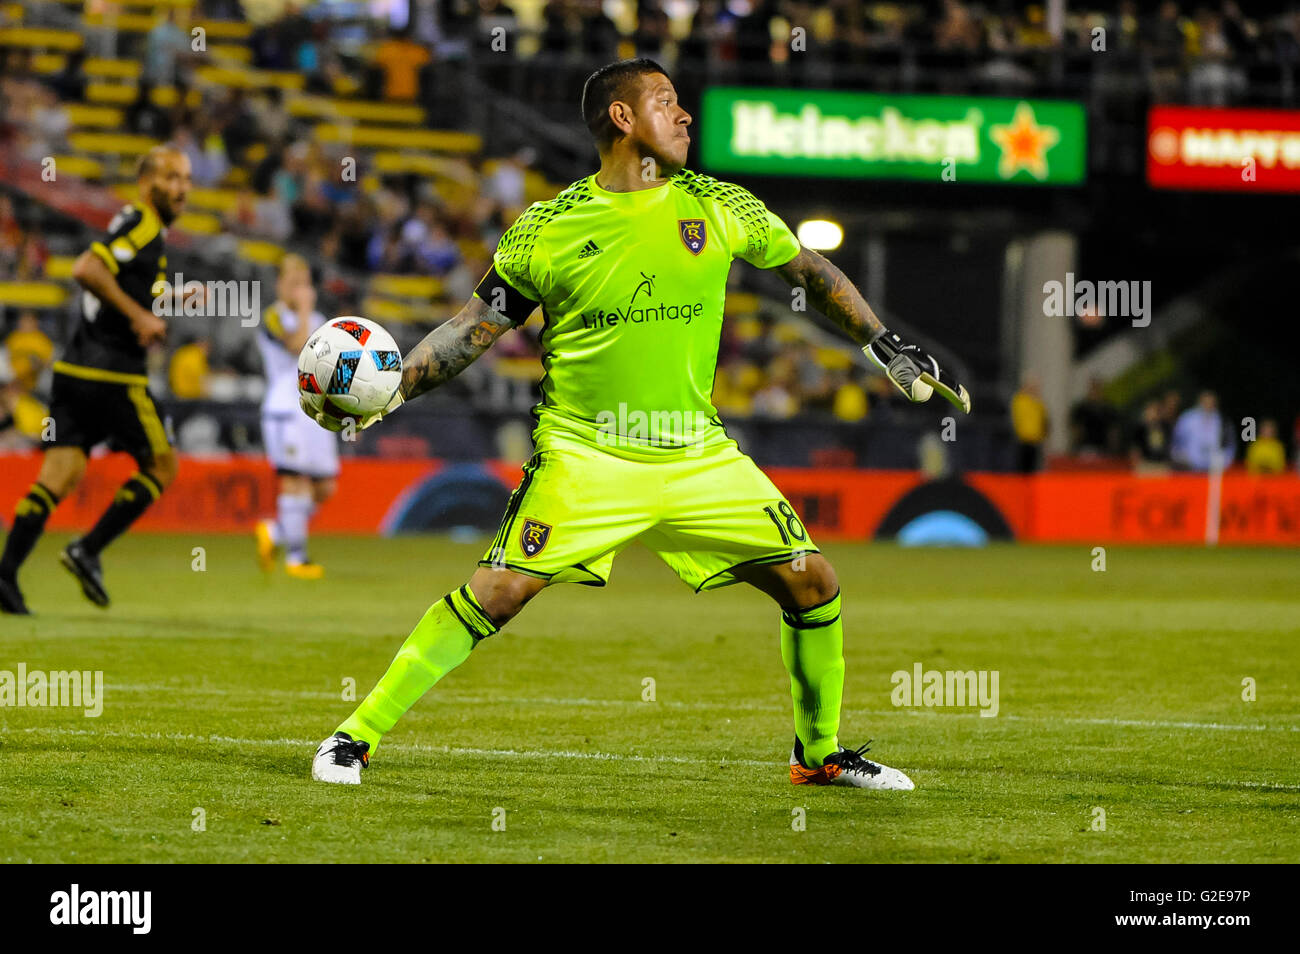 Real Salt Lake goalkeeper Nick Rimando (18) in the second half of the match between Real Salt Lake and Columbus Crew SC. May 28, 2016 at MAPFRE Stadium in Columbus Ohio. Columbus Crew SC 4 - Real Salt Lake 3.Photo Credit: Dorn Byg/CSM Stock Photo